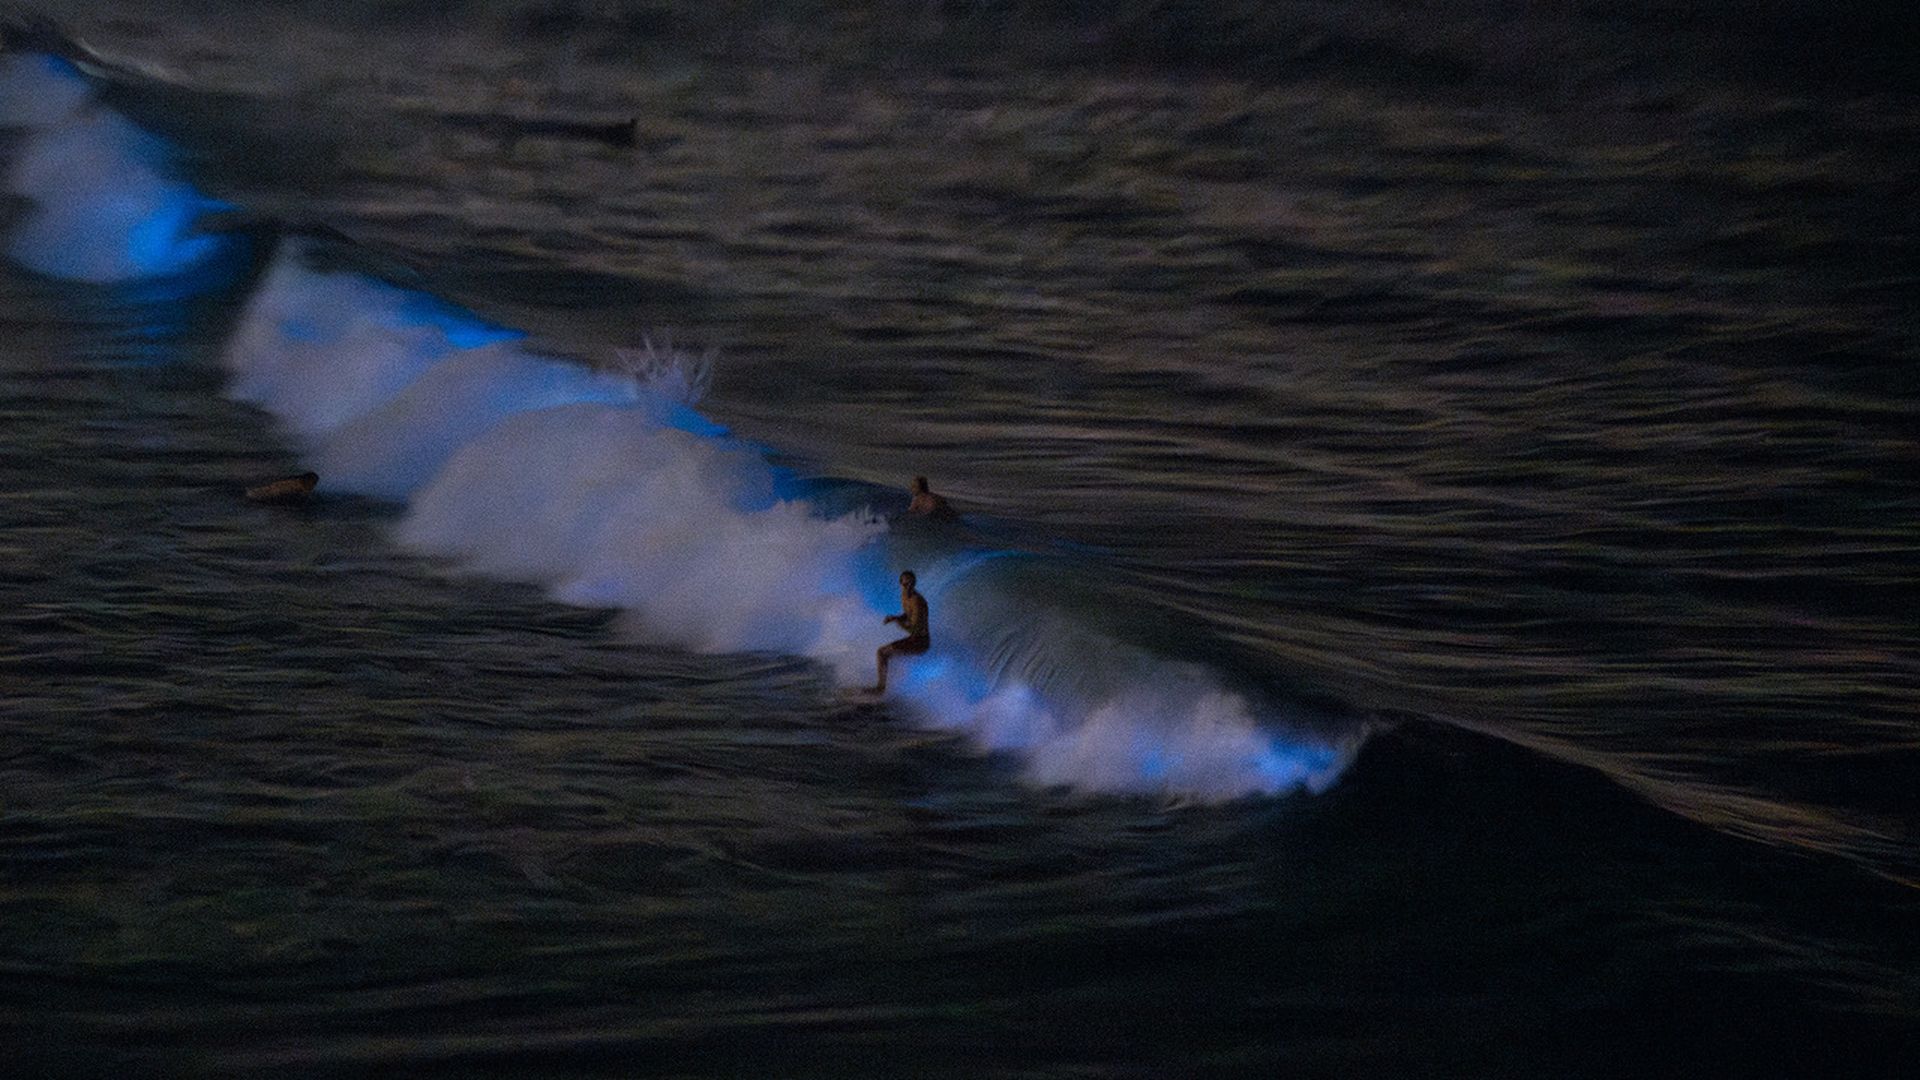 A surfer rides a wave at night that's glowing bright blue from bioluminescent plankton.